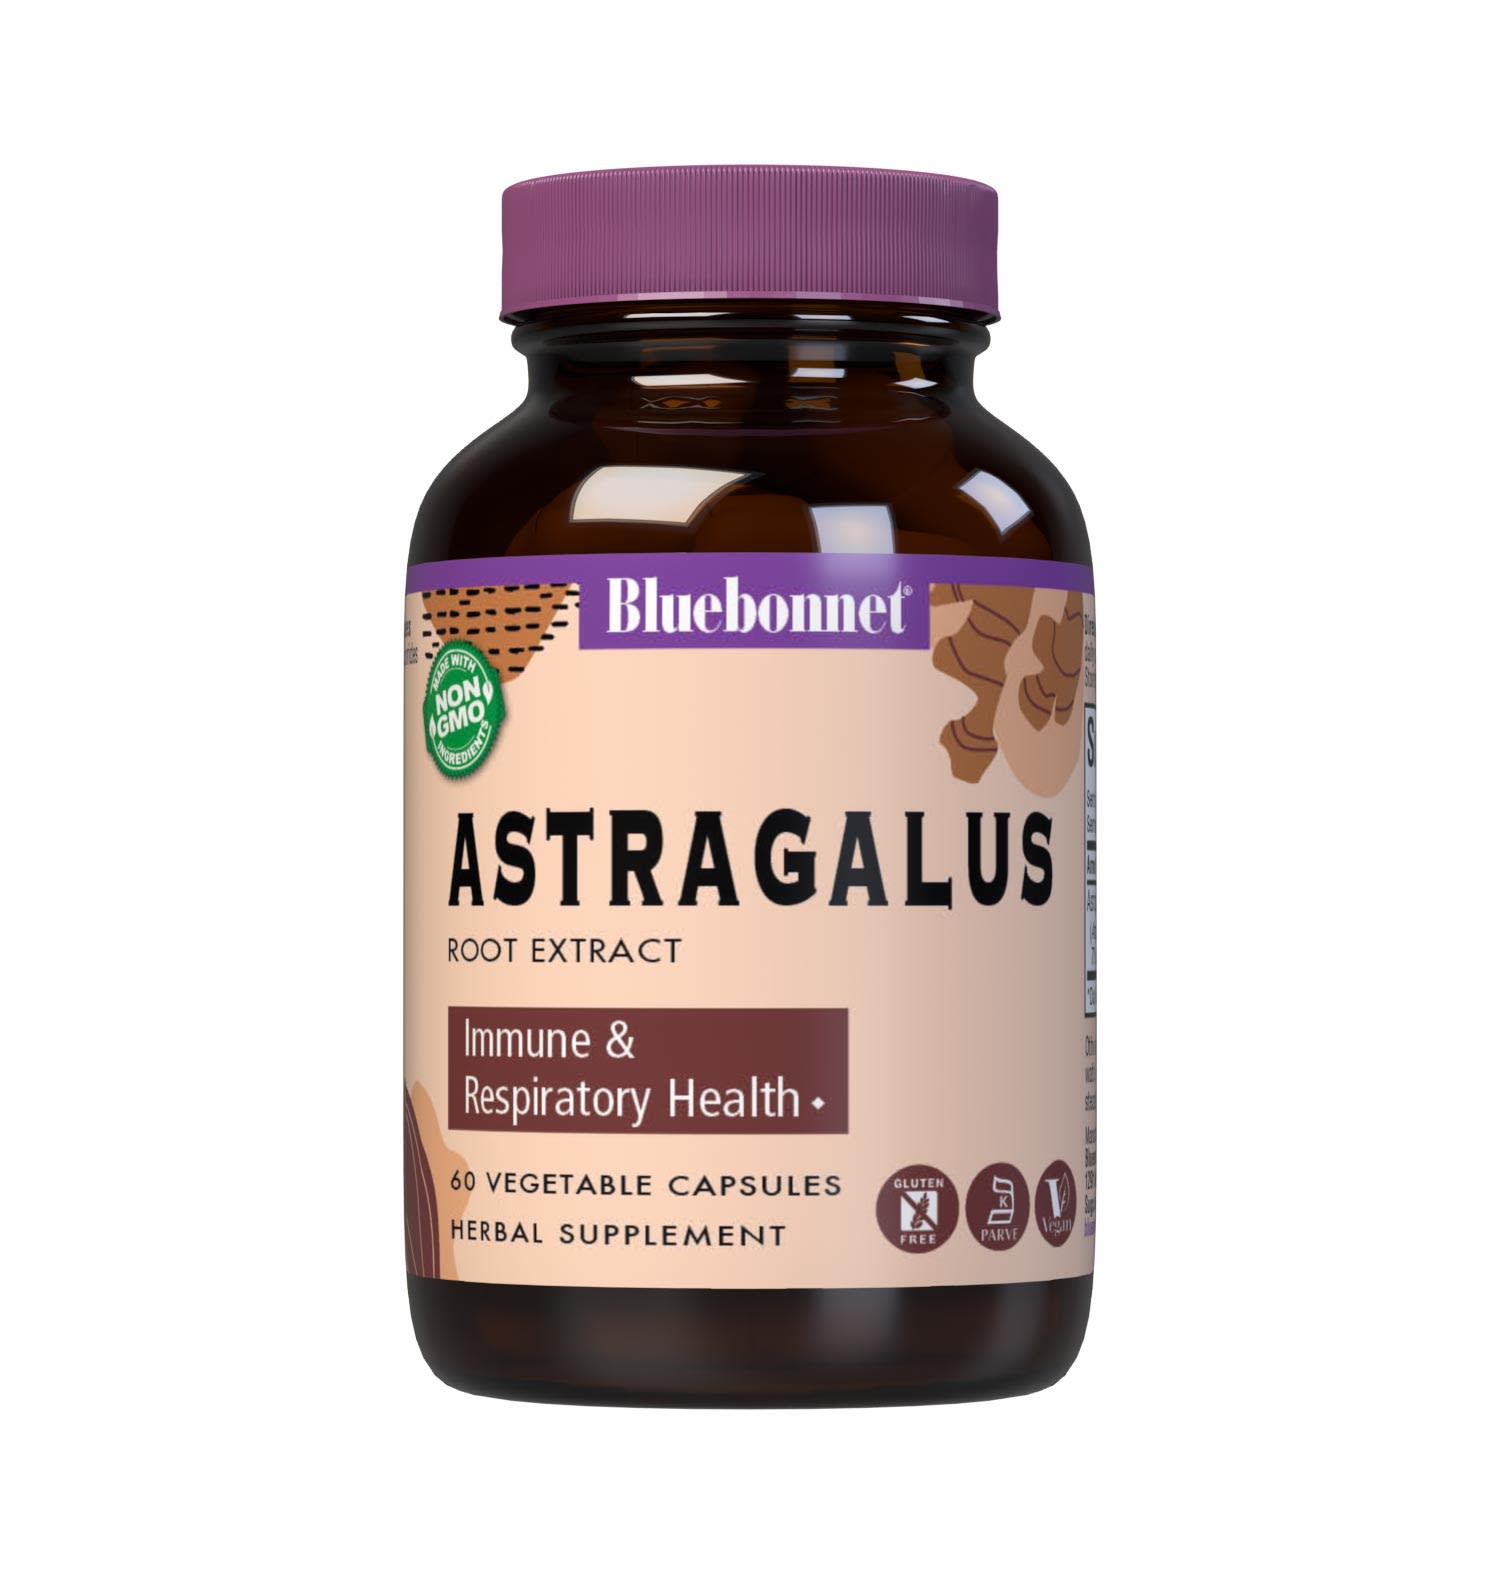 Bluebonnet’s Astragalus Root Extract 60 Vegetable Capsules provide a standardized extract of polysaccharides, the most researched active constituents found in astragalus root to support immune health. A clean and gentle water-based extraction method is employed to capture and preserve astragalus’ most valuable components. #size_60 count